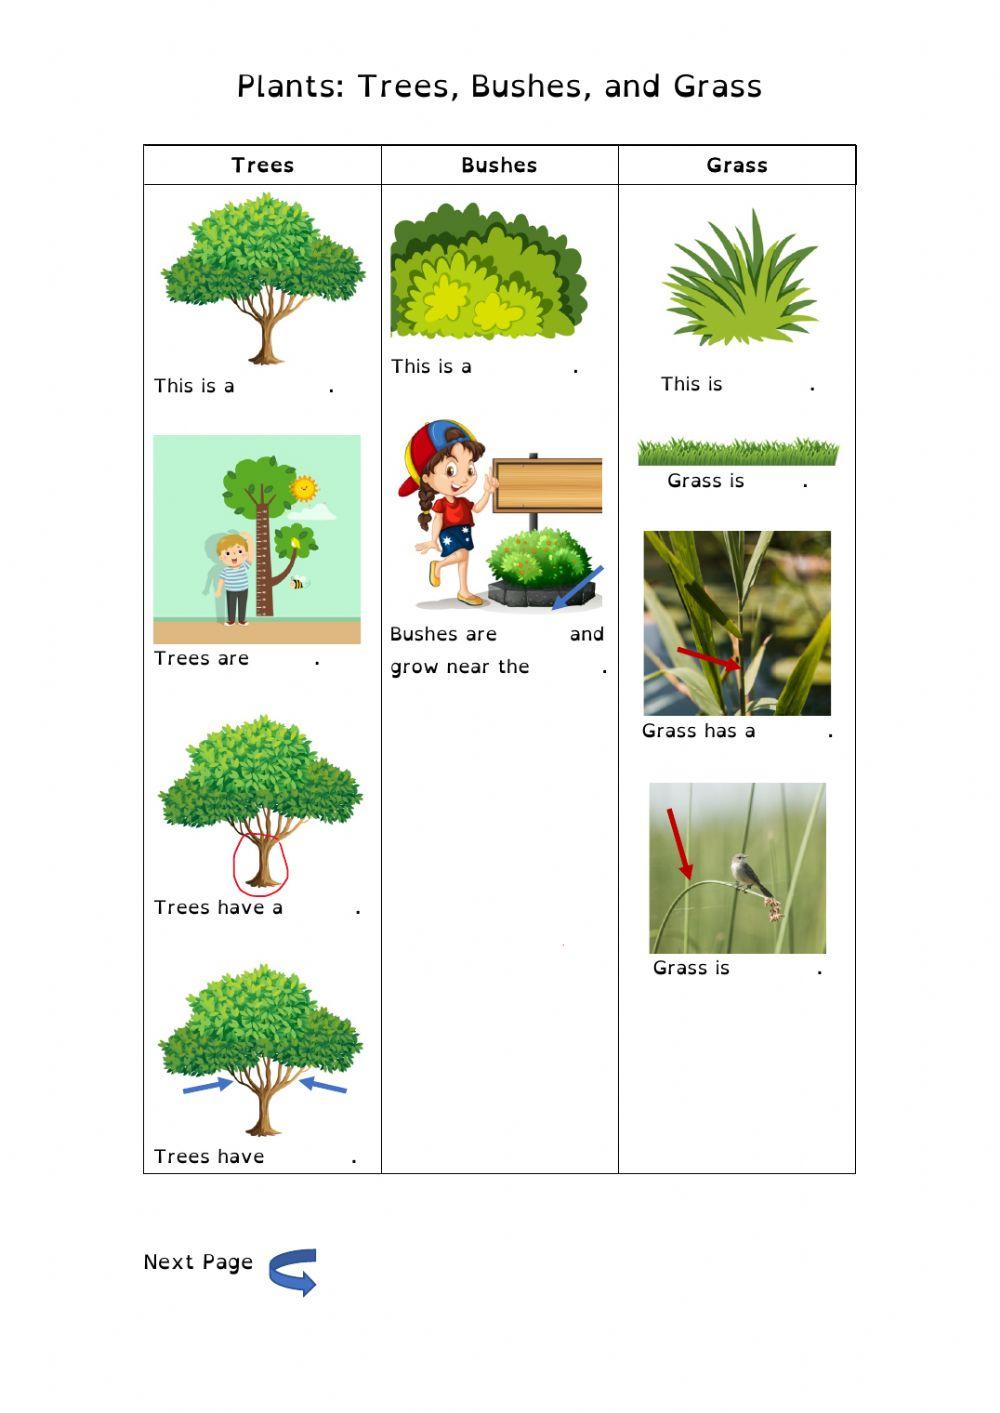 Plants: Trees, bushes, and grass